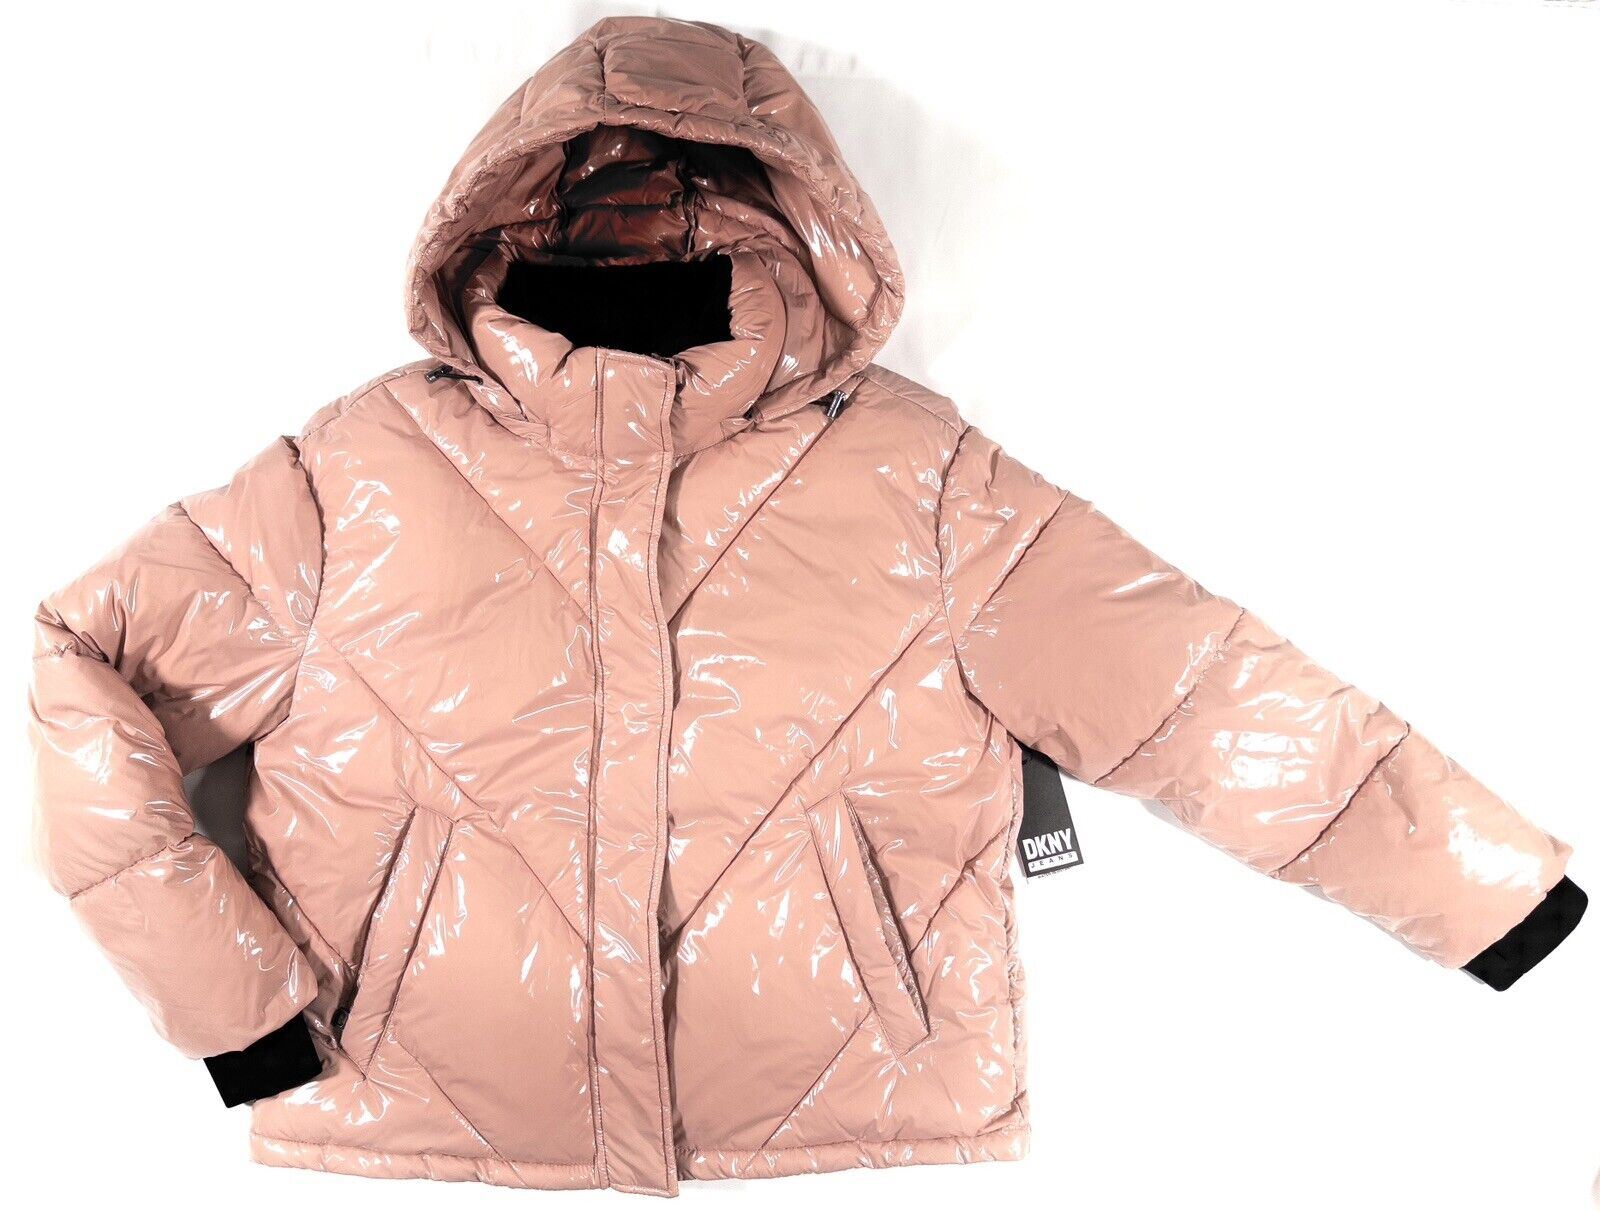 DKNY JEANS Women's Pink High Shine Hooded Puffer Coat Size UK 12